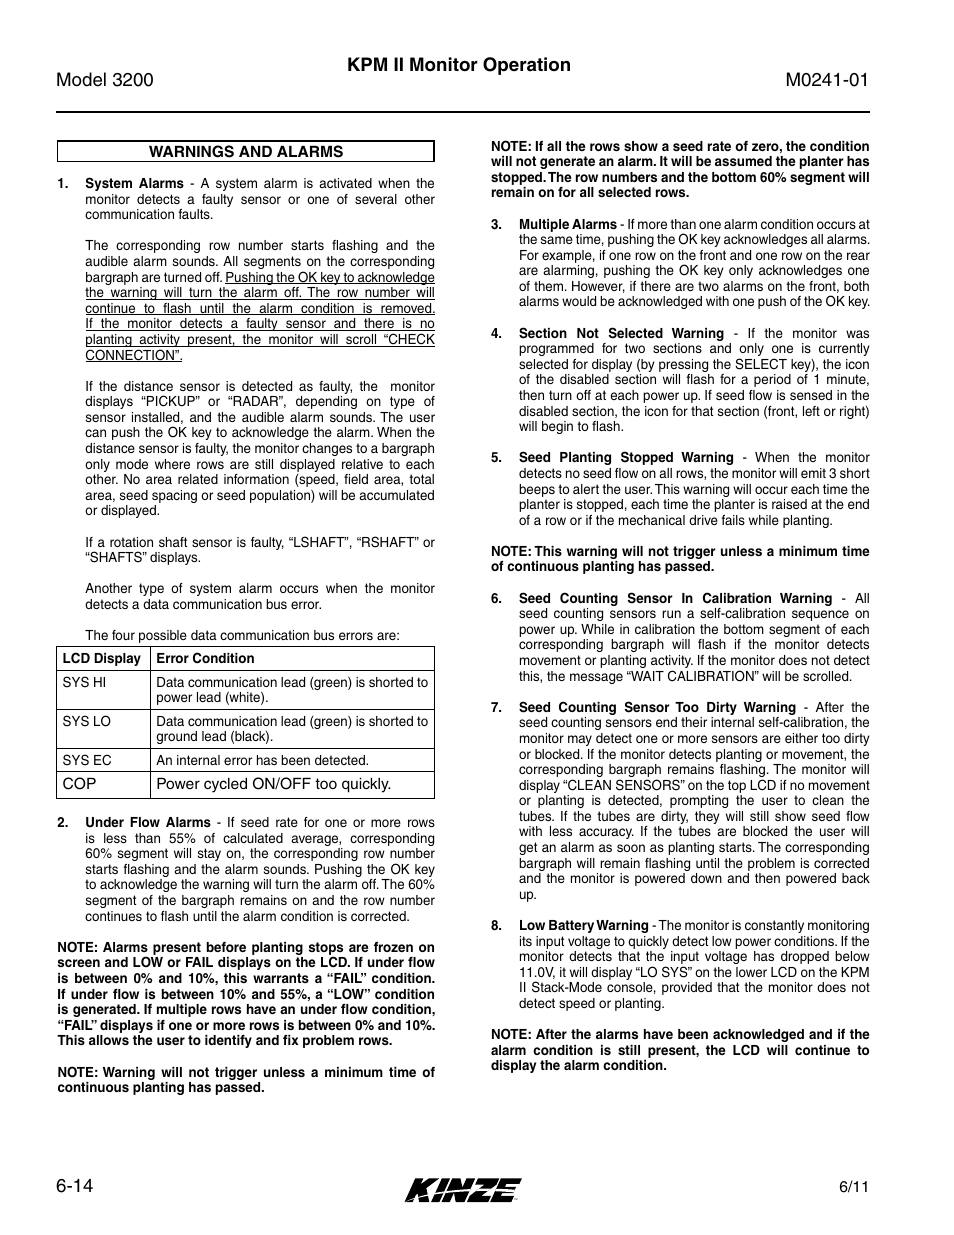 Warnings and alarms -14, Kpm ii monitor operation | Kinze 3200 Wing-Fold Planter Rev. 7/14 User Manual | Page 104 / 192